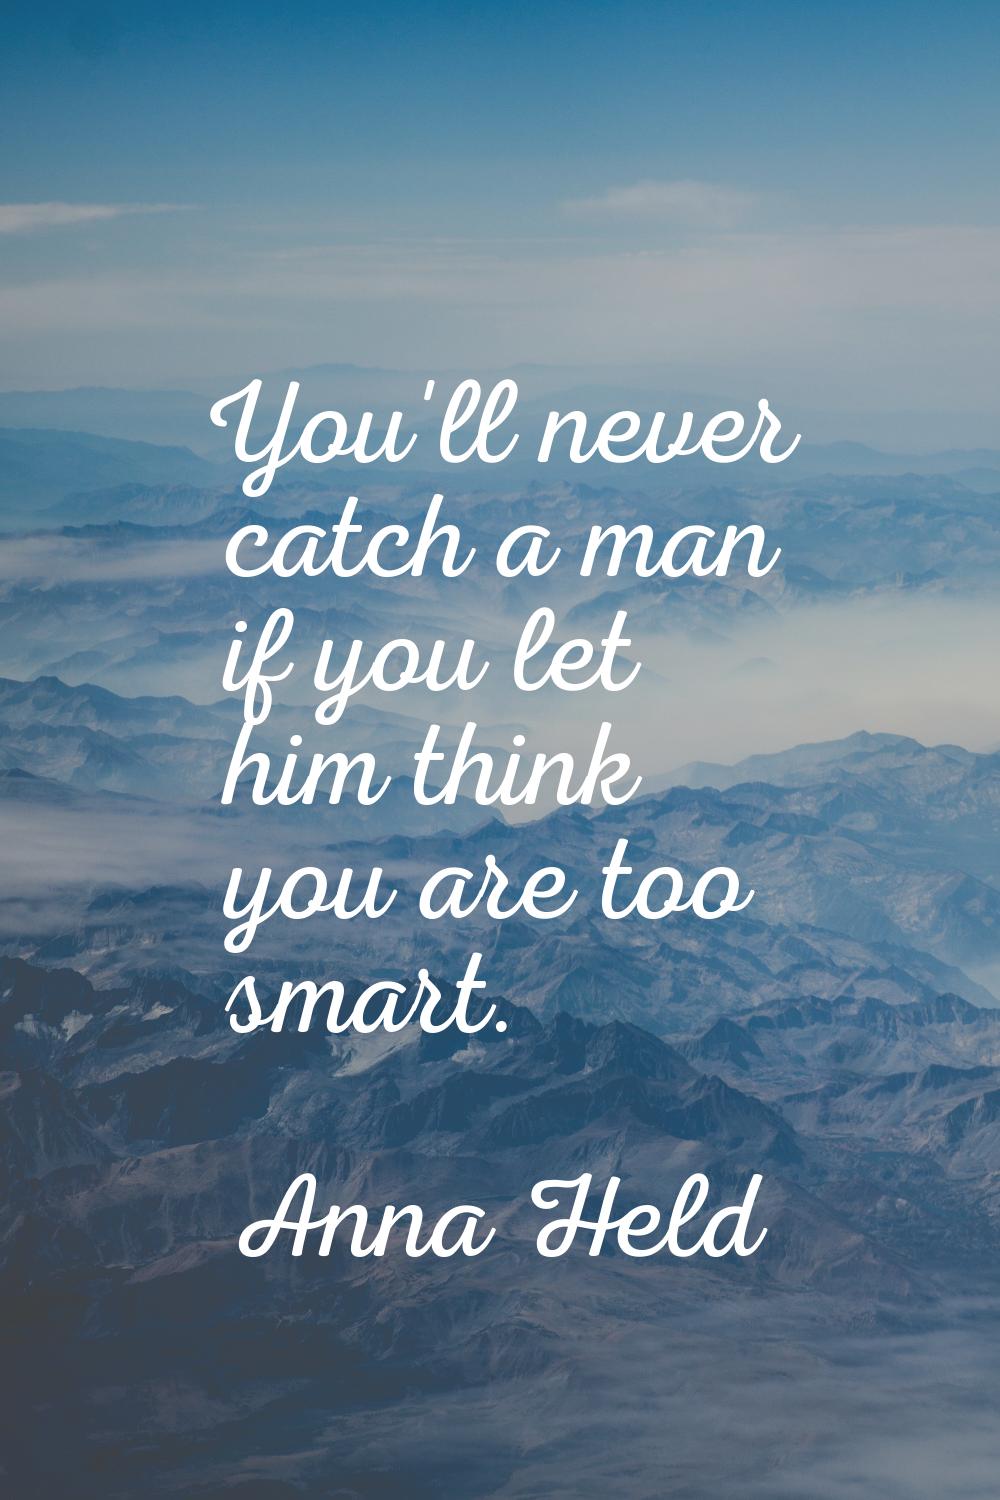 You'll never catch a man if you let him think you are too smart.